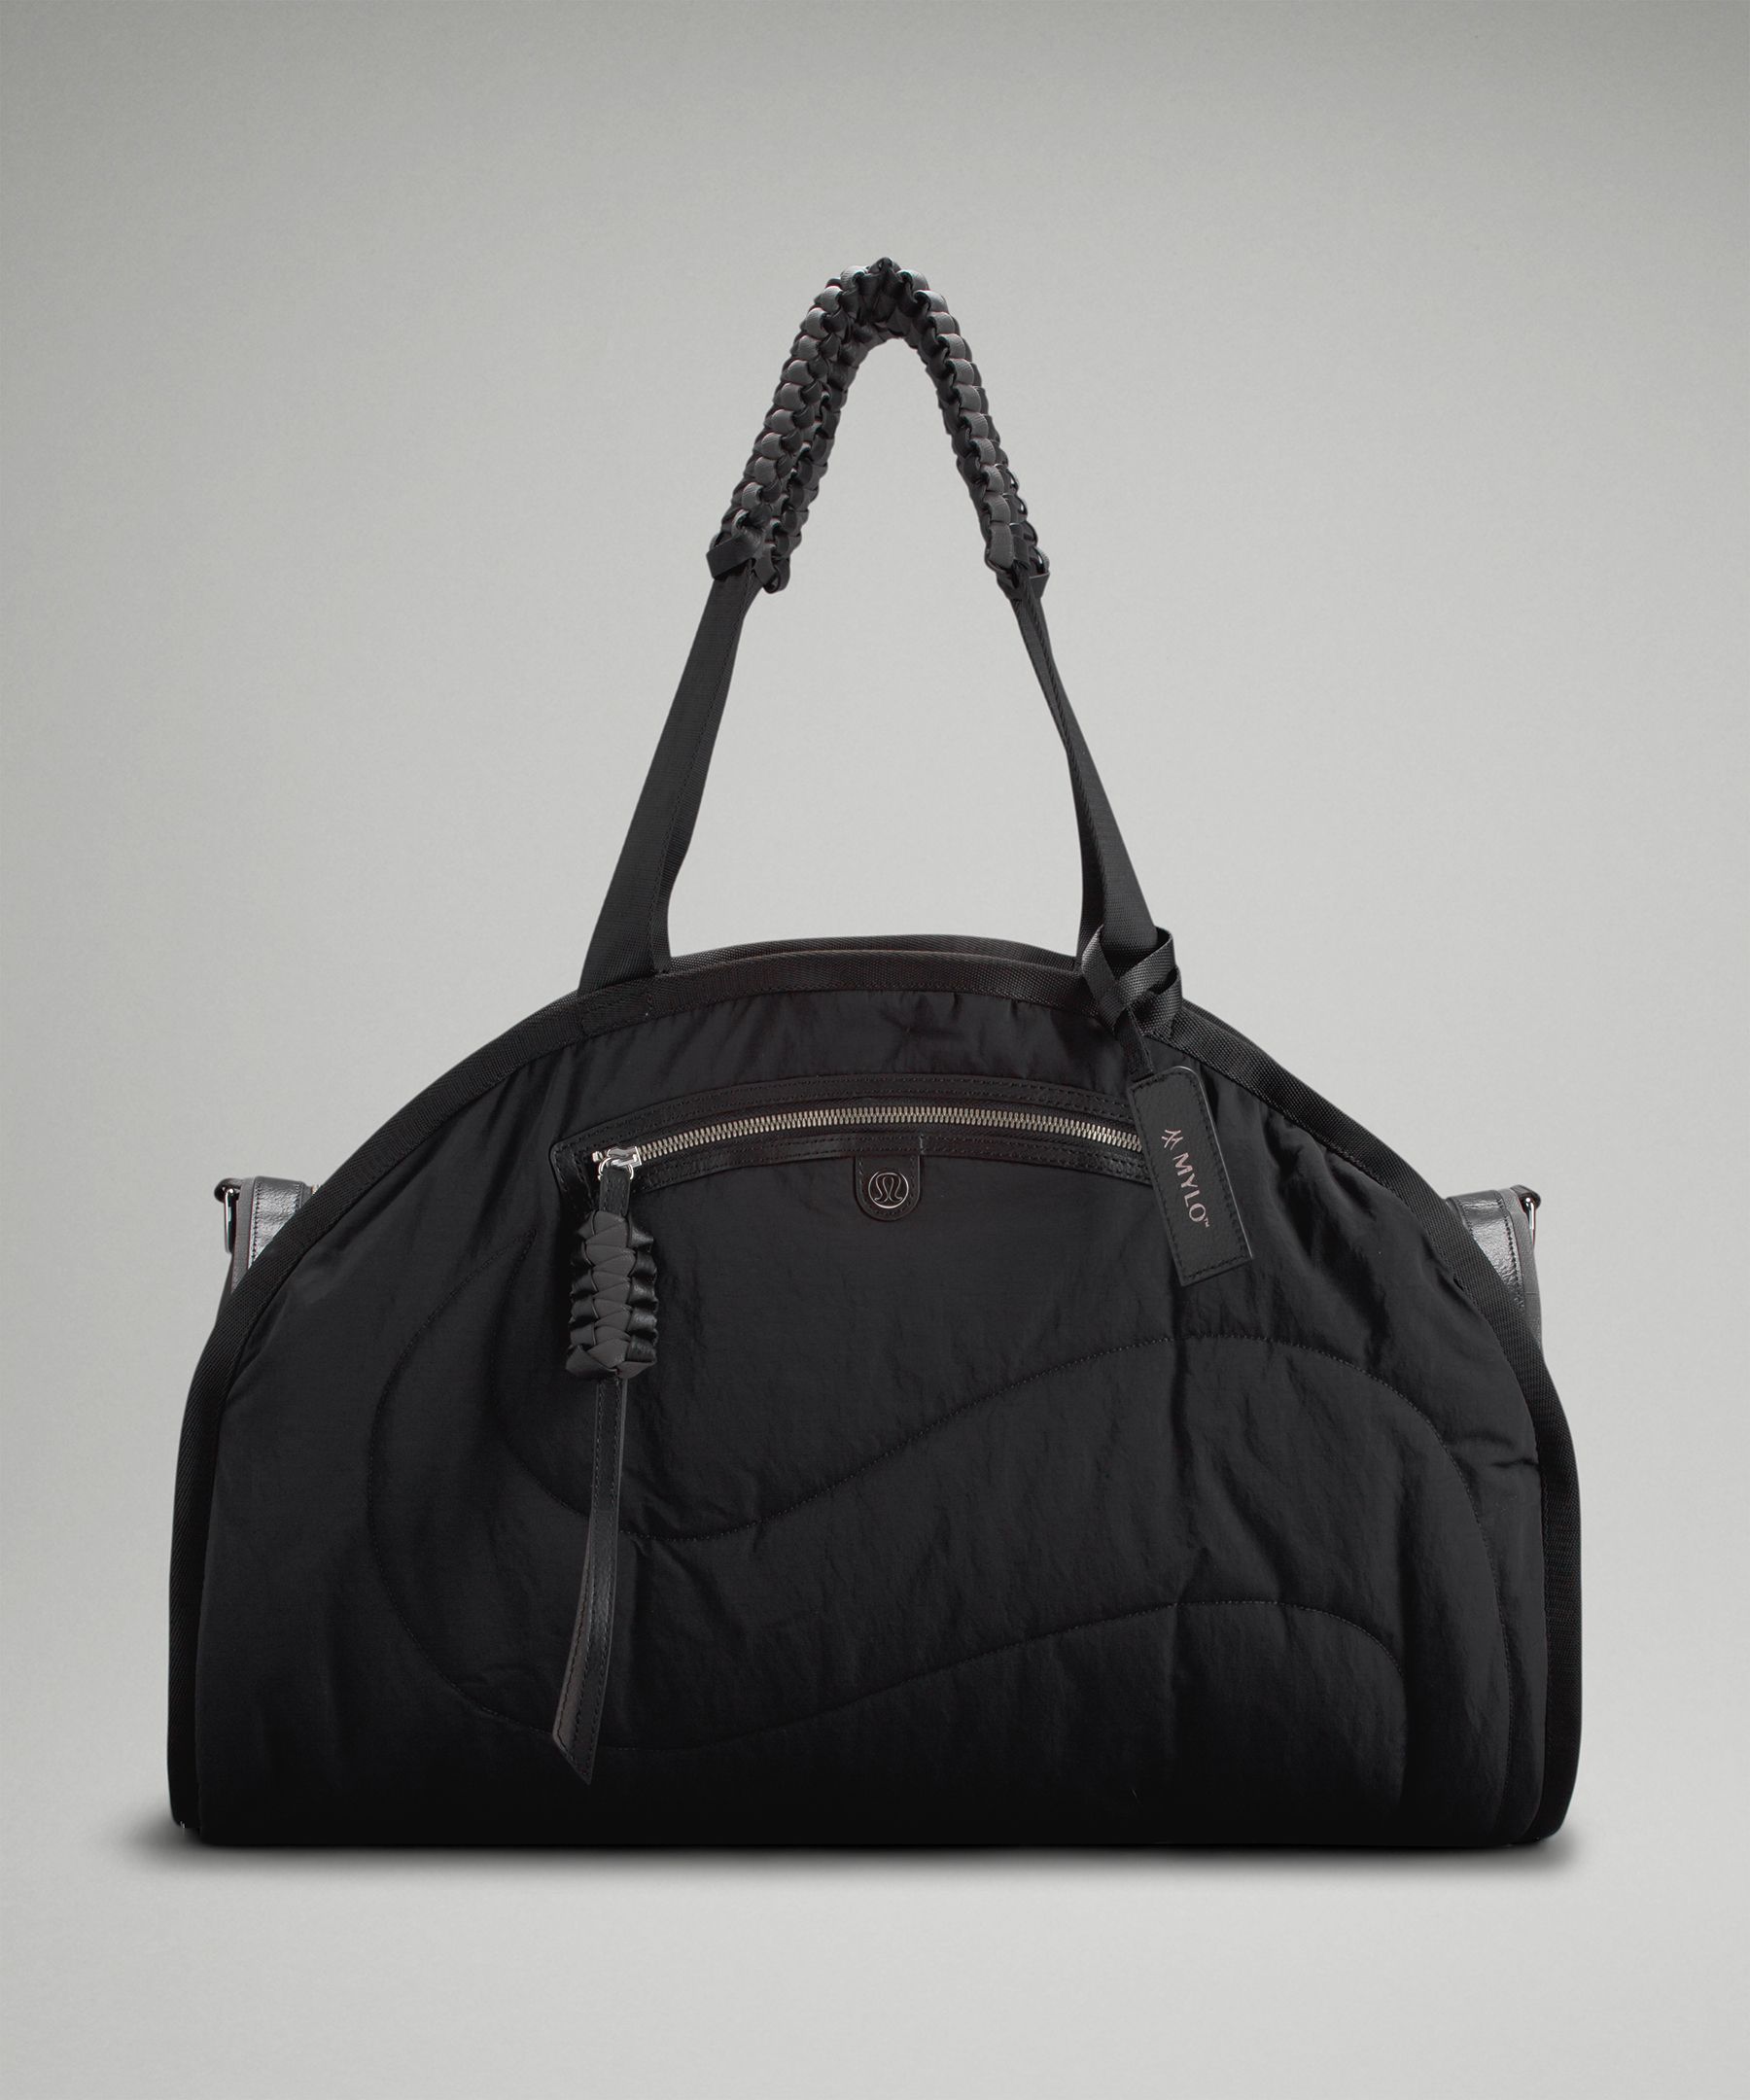 Barrel Duffle Bag 24L with Mylo™ *Online Only | Unisex Bags,Purses 